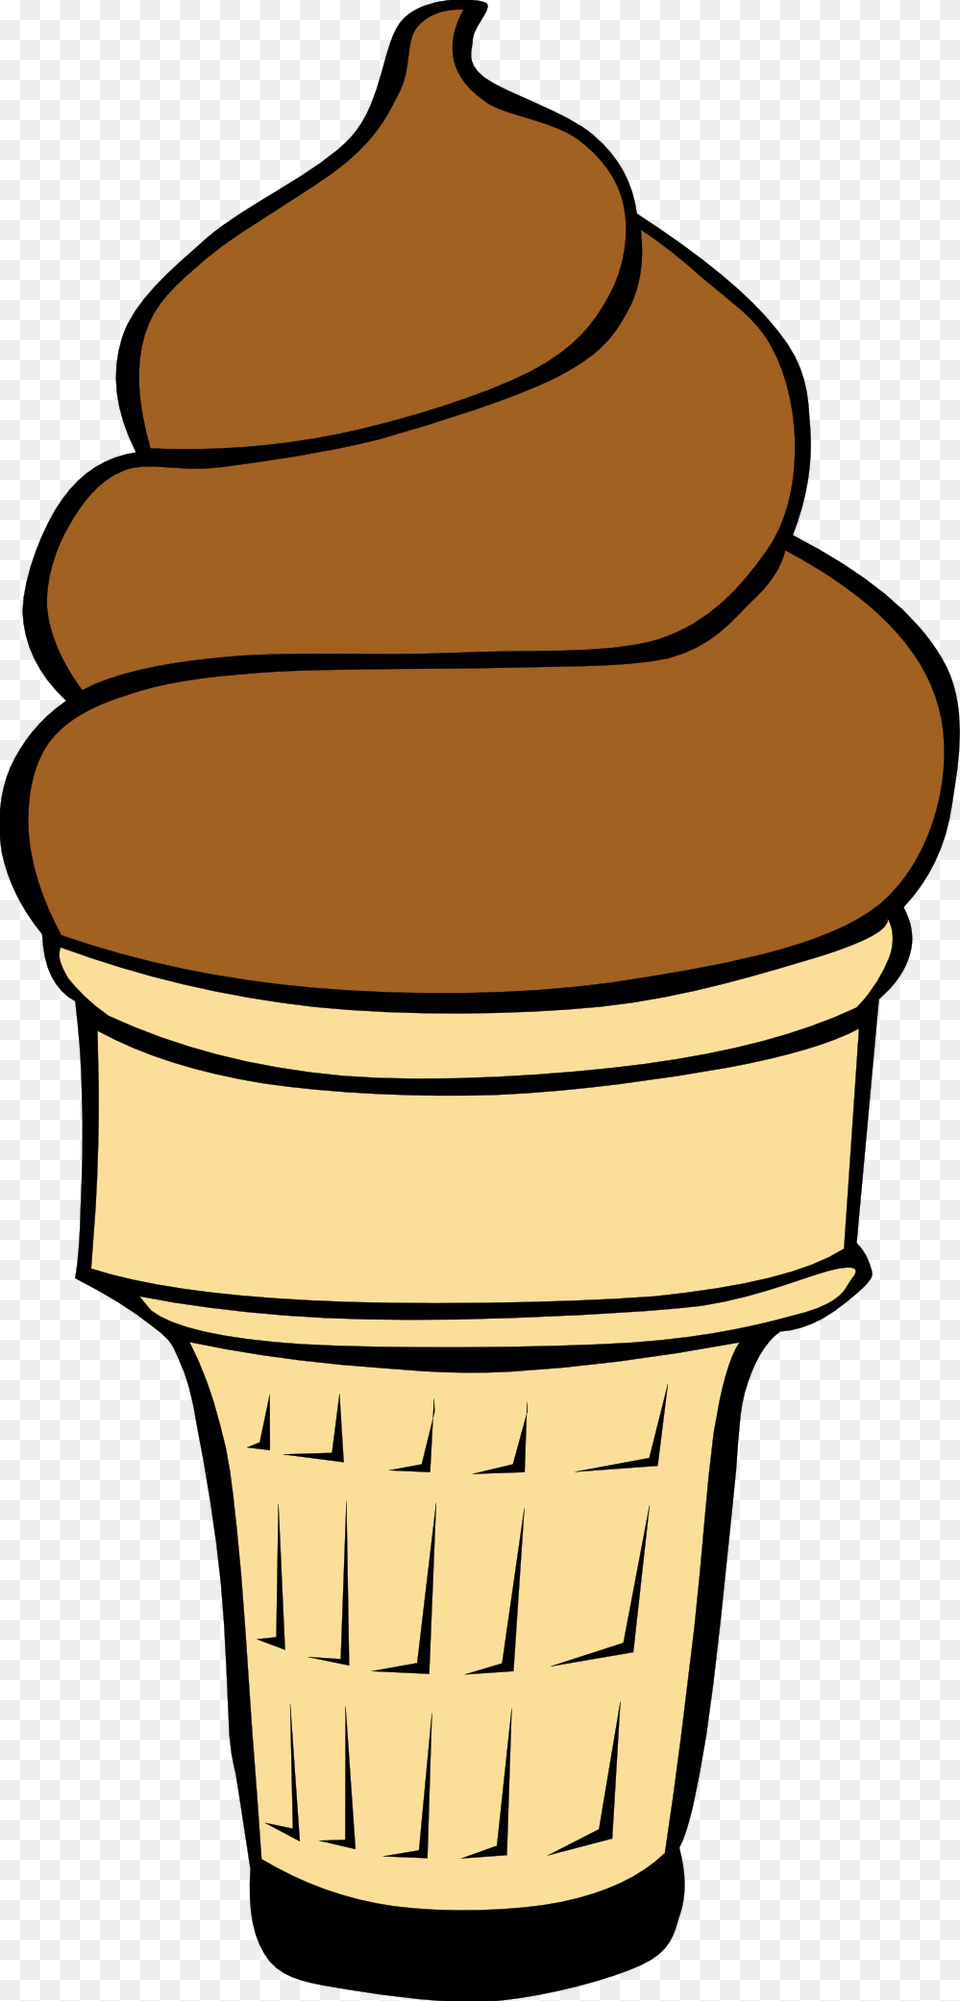 Empty Ice Cream Cone Clipart Chocolate Ice Cream Cone Clip Art, Dessert, Food, Ice Cream, Ammunition Free Transparent Png